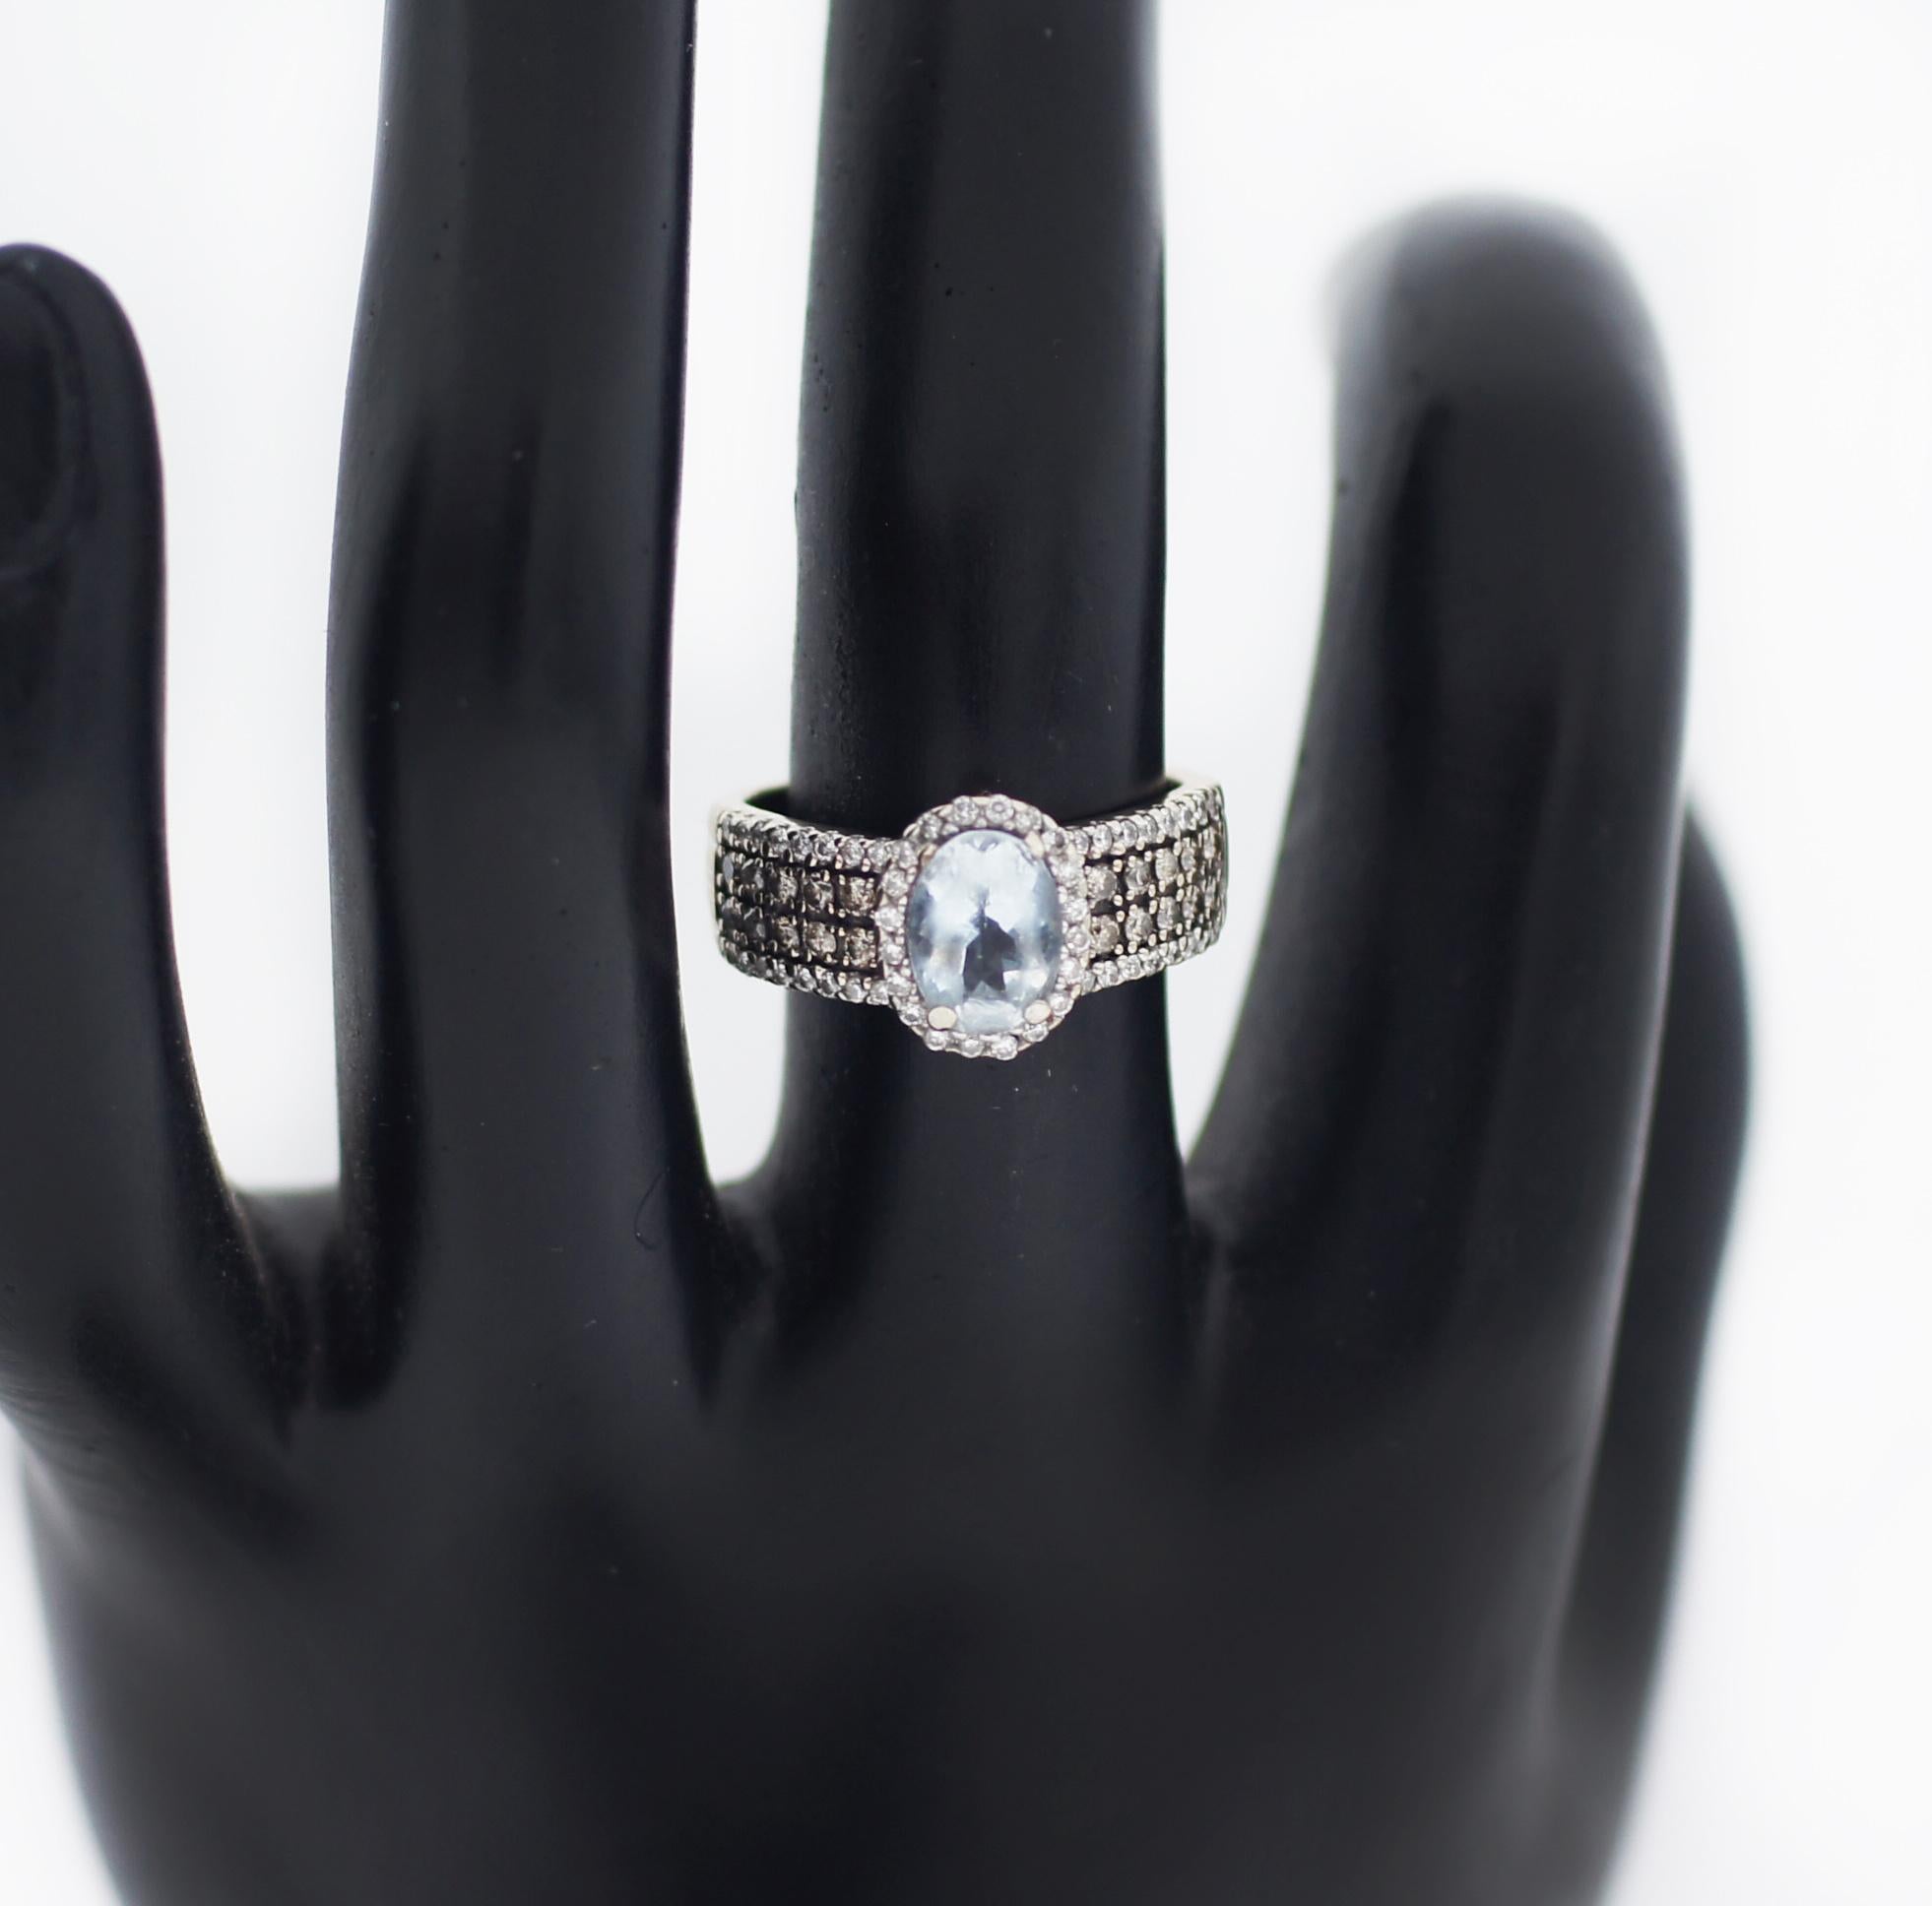 LeVian
Genuine Aquamarine
Chocolate and white Diamond Ring
You'll be enthralled by this aquamarine ring bordered by white and chocolate diamonds.
Metal: 14K white gold
Stones: Genuine oval aquamarine
Other Stones: ½ ct. t.w. white and chocolate